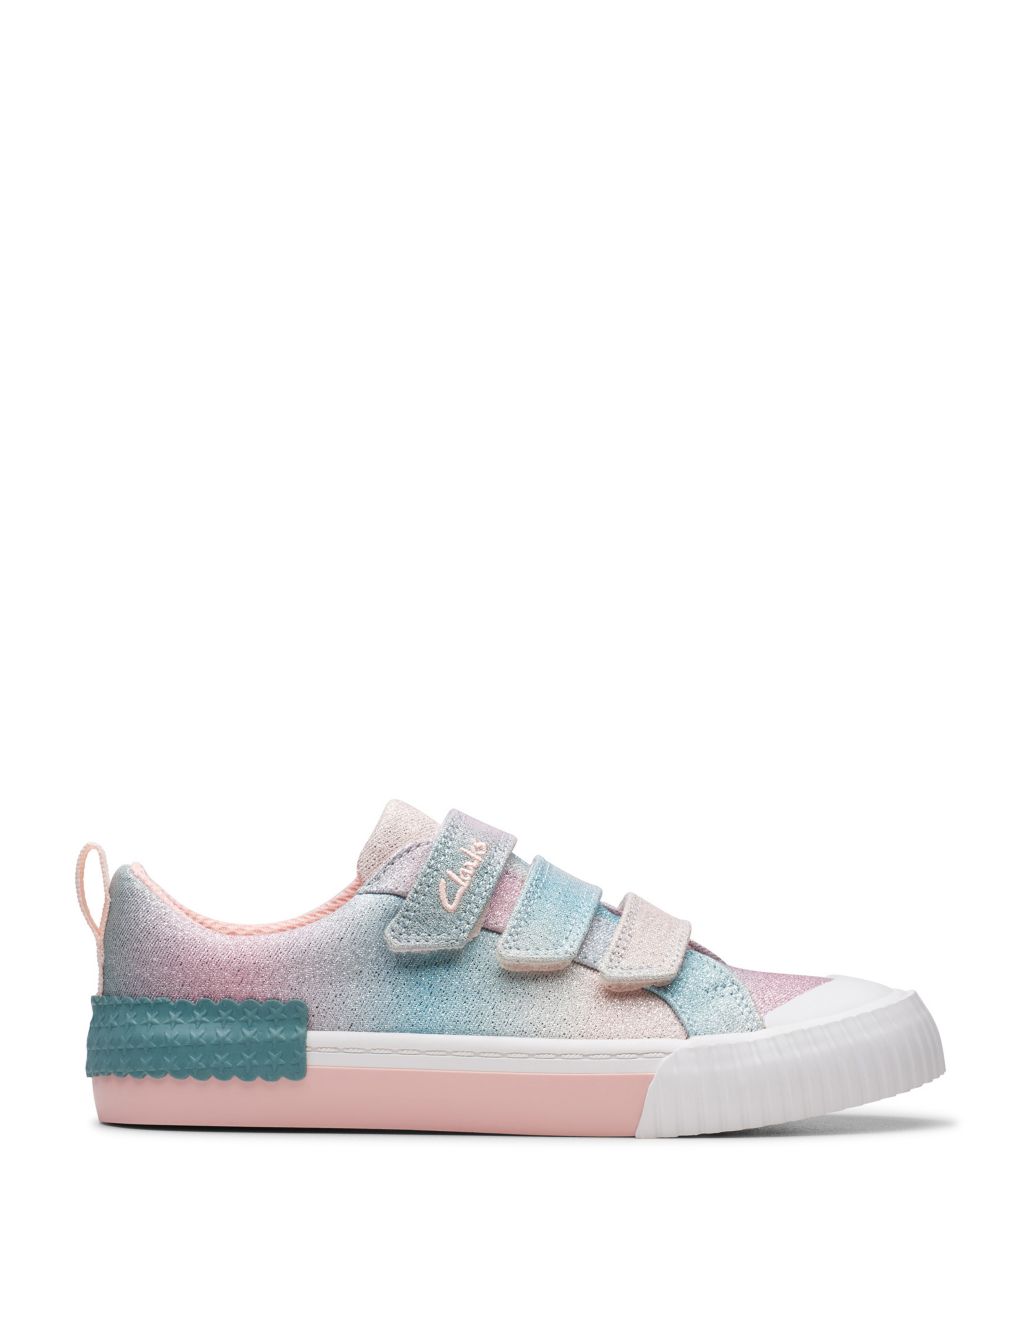 Kids' Ombre Riptape Trainers (7 Small - 2 1/2 Large)